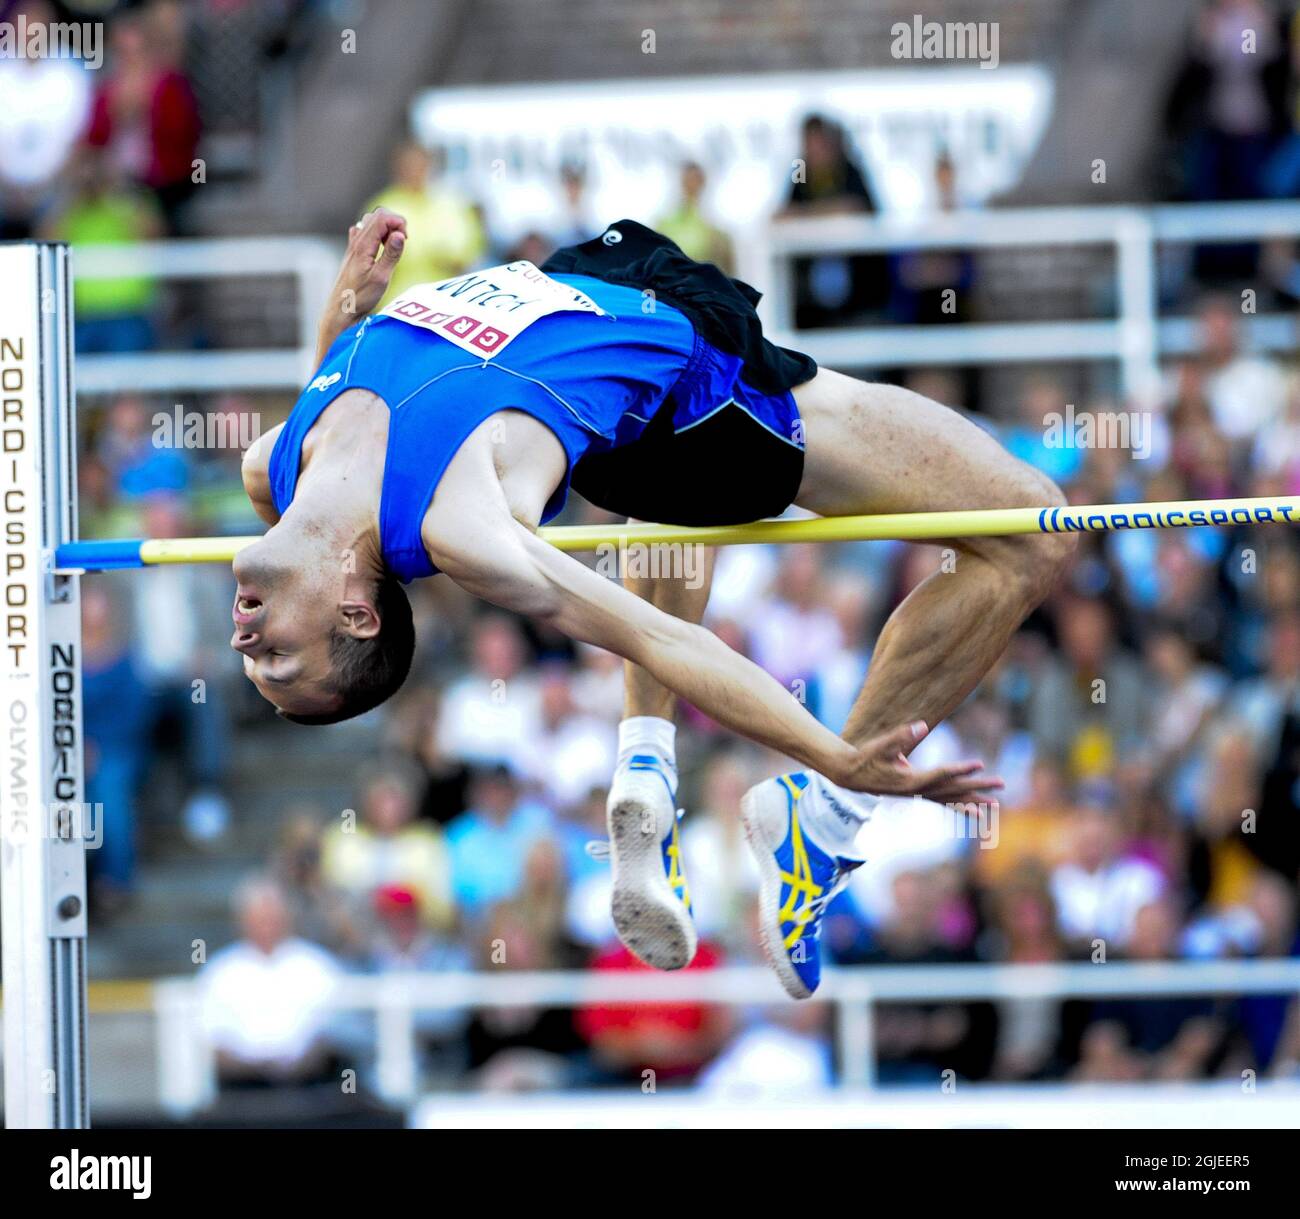 Stefan Holm of Sweden during the men's high jump at DN Galan Super Grand Prix in athletics at Stockholm Olympic Stadium. Stock Photo